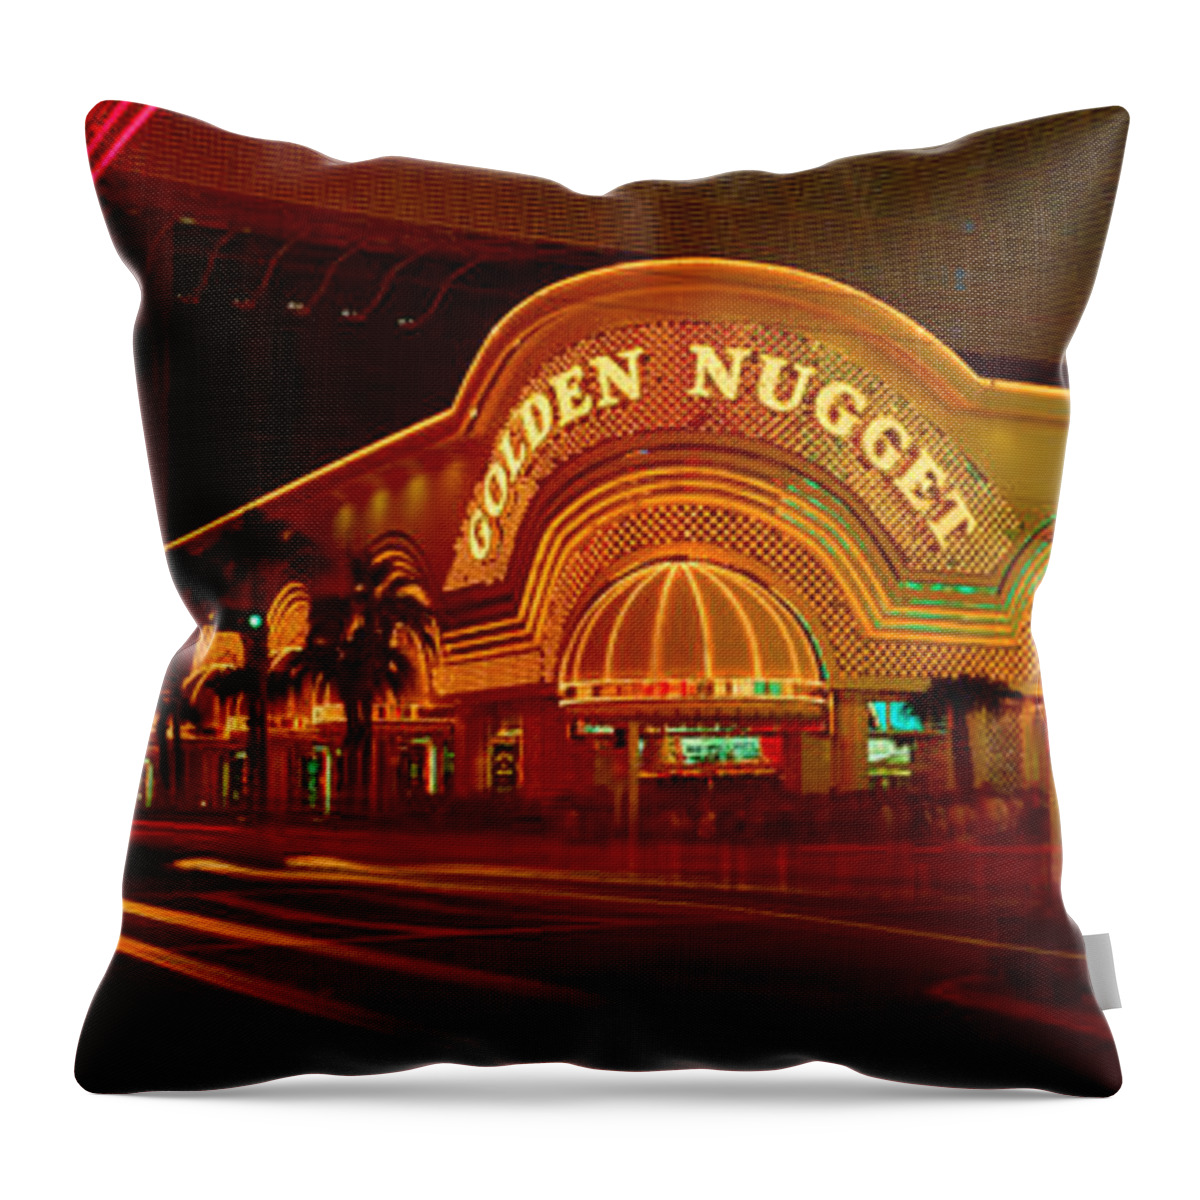 Photography Throw Pillow featuring the photograph Panoramic View Of Golden Nugget Casino by Panoramic Images